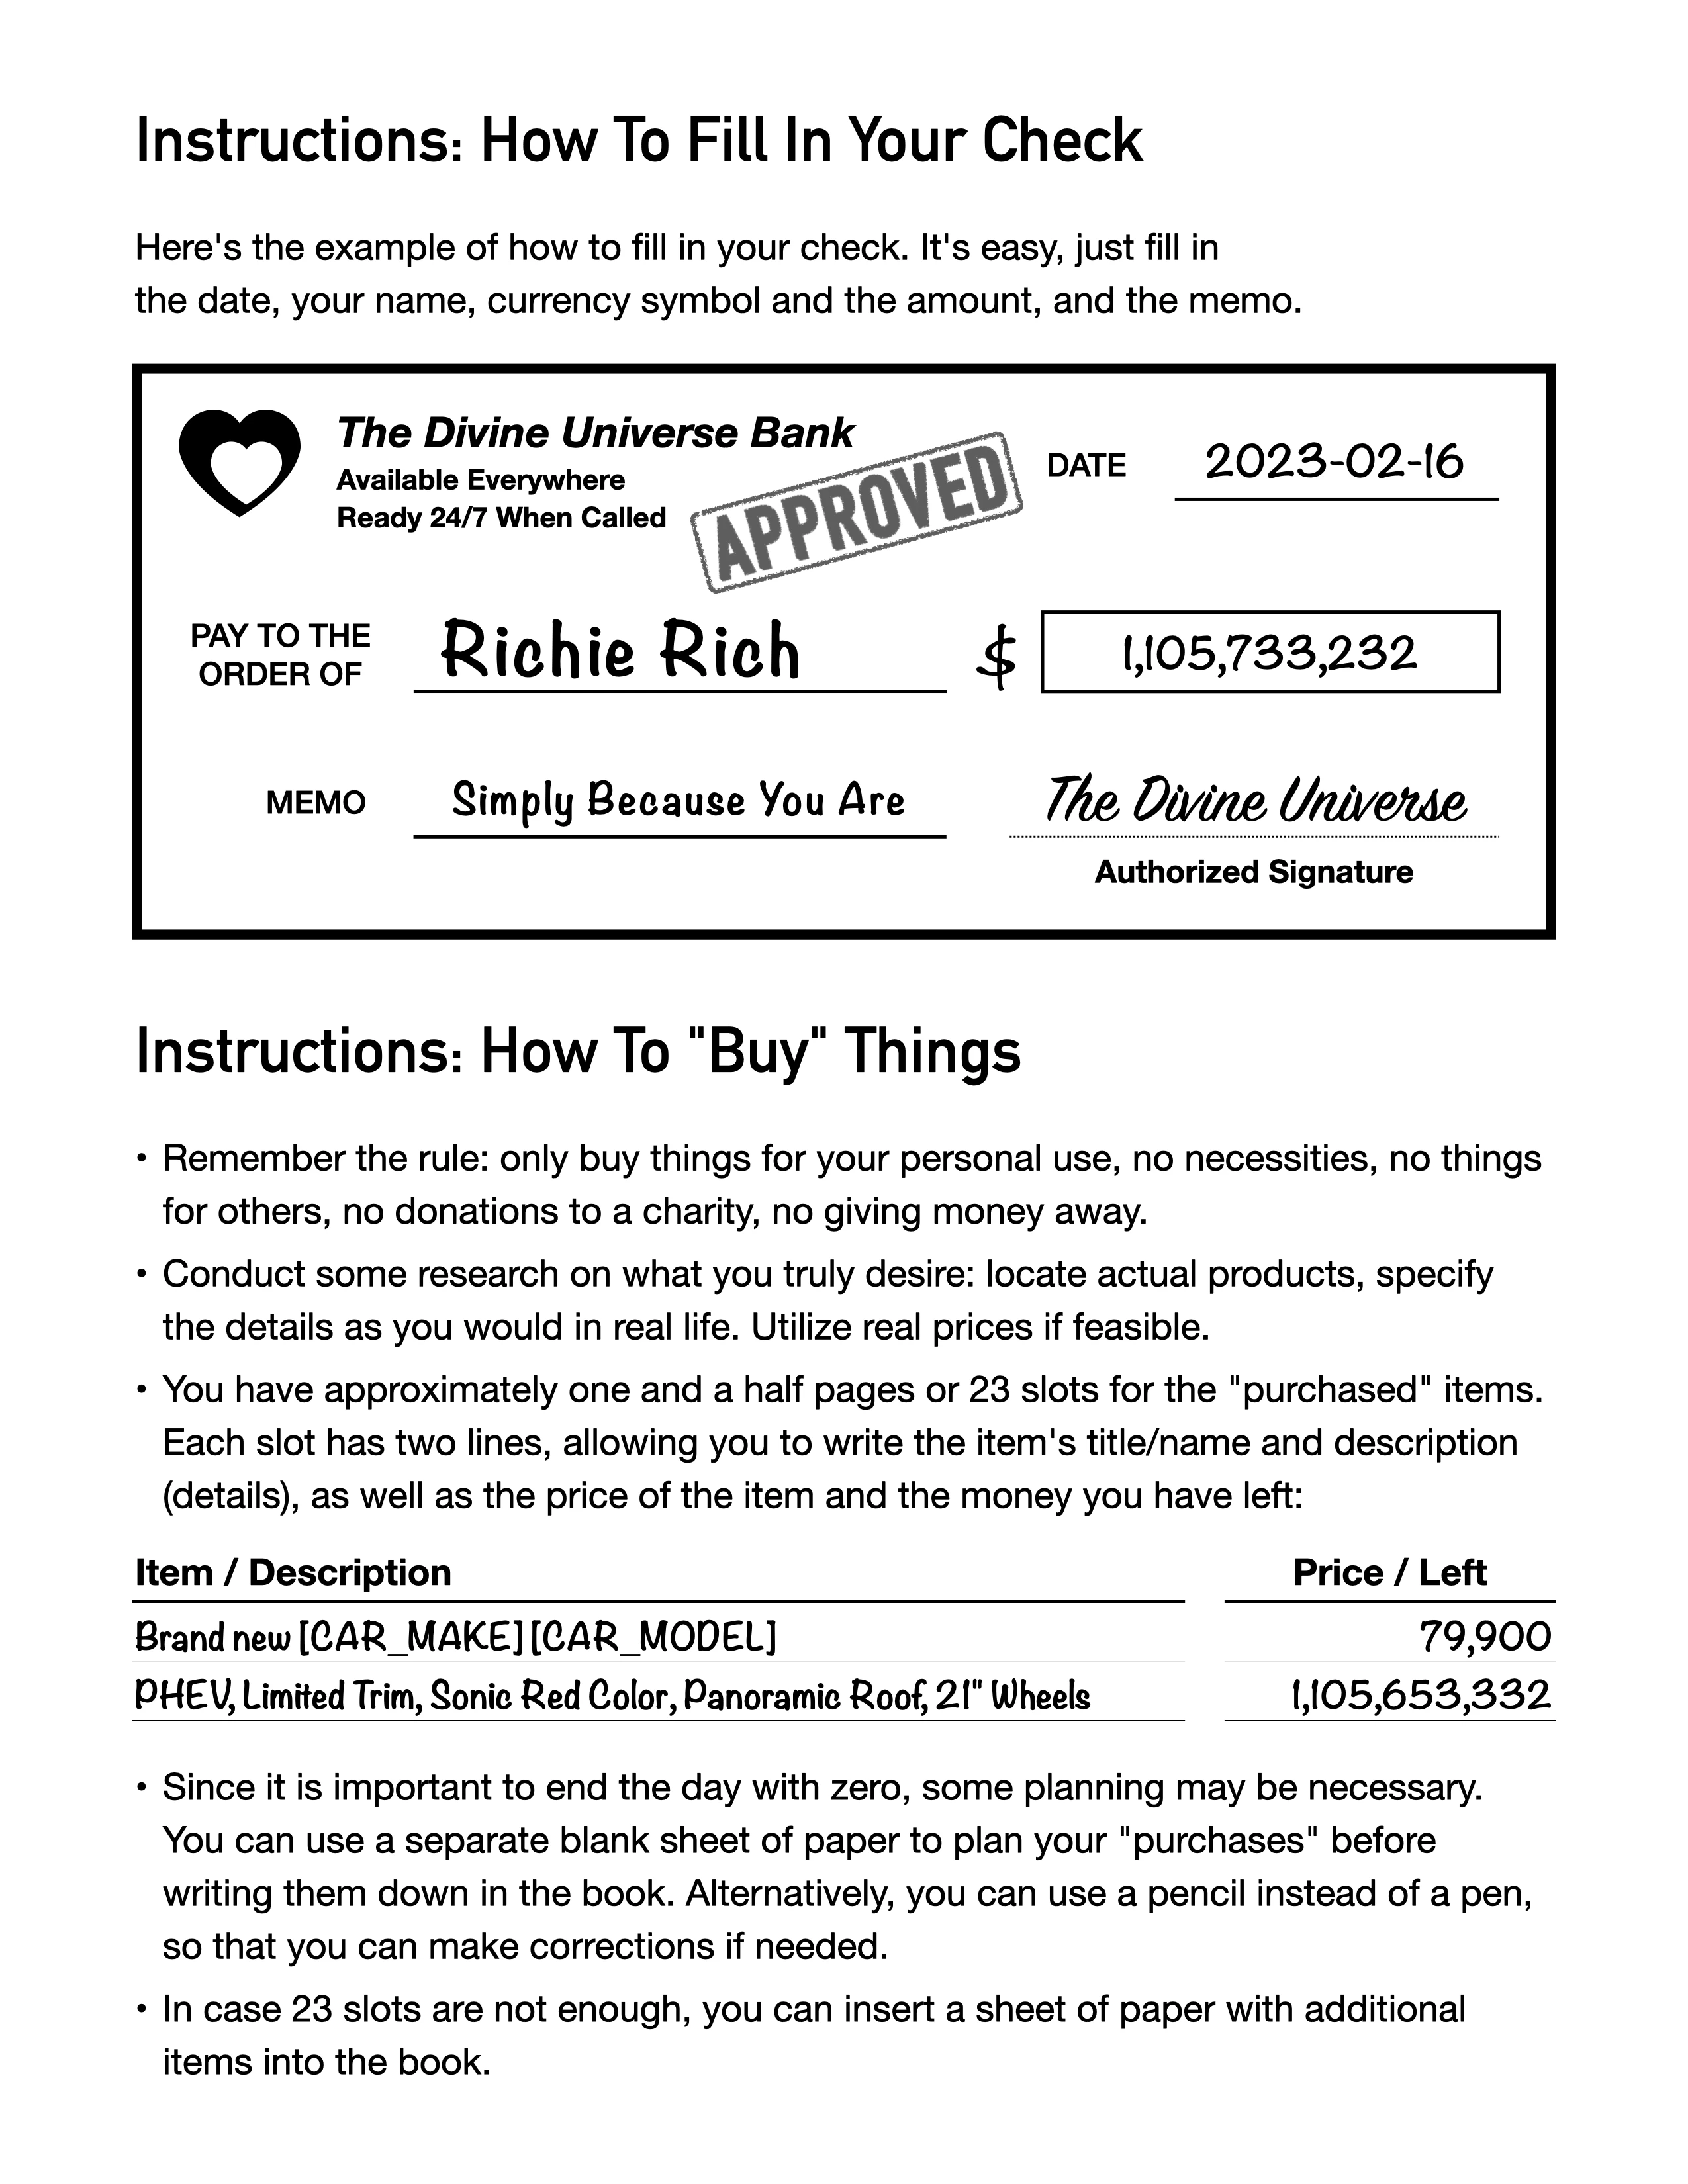 Instructions on how to fill in your check and buy things